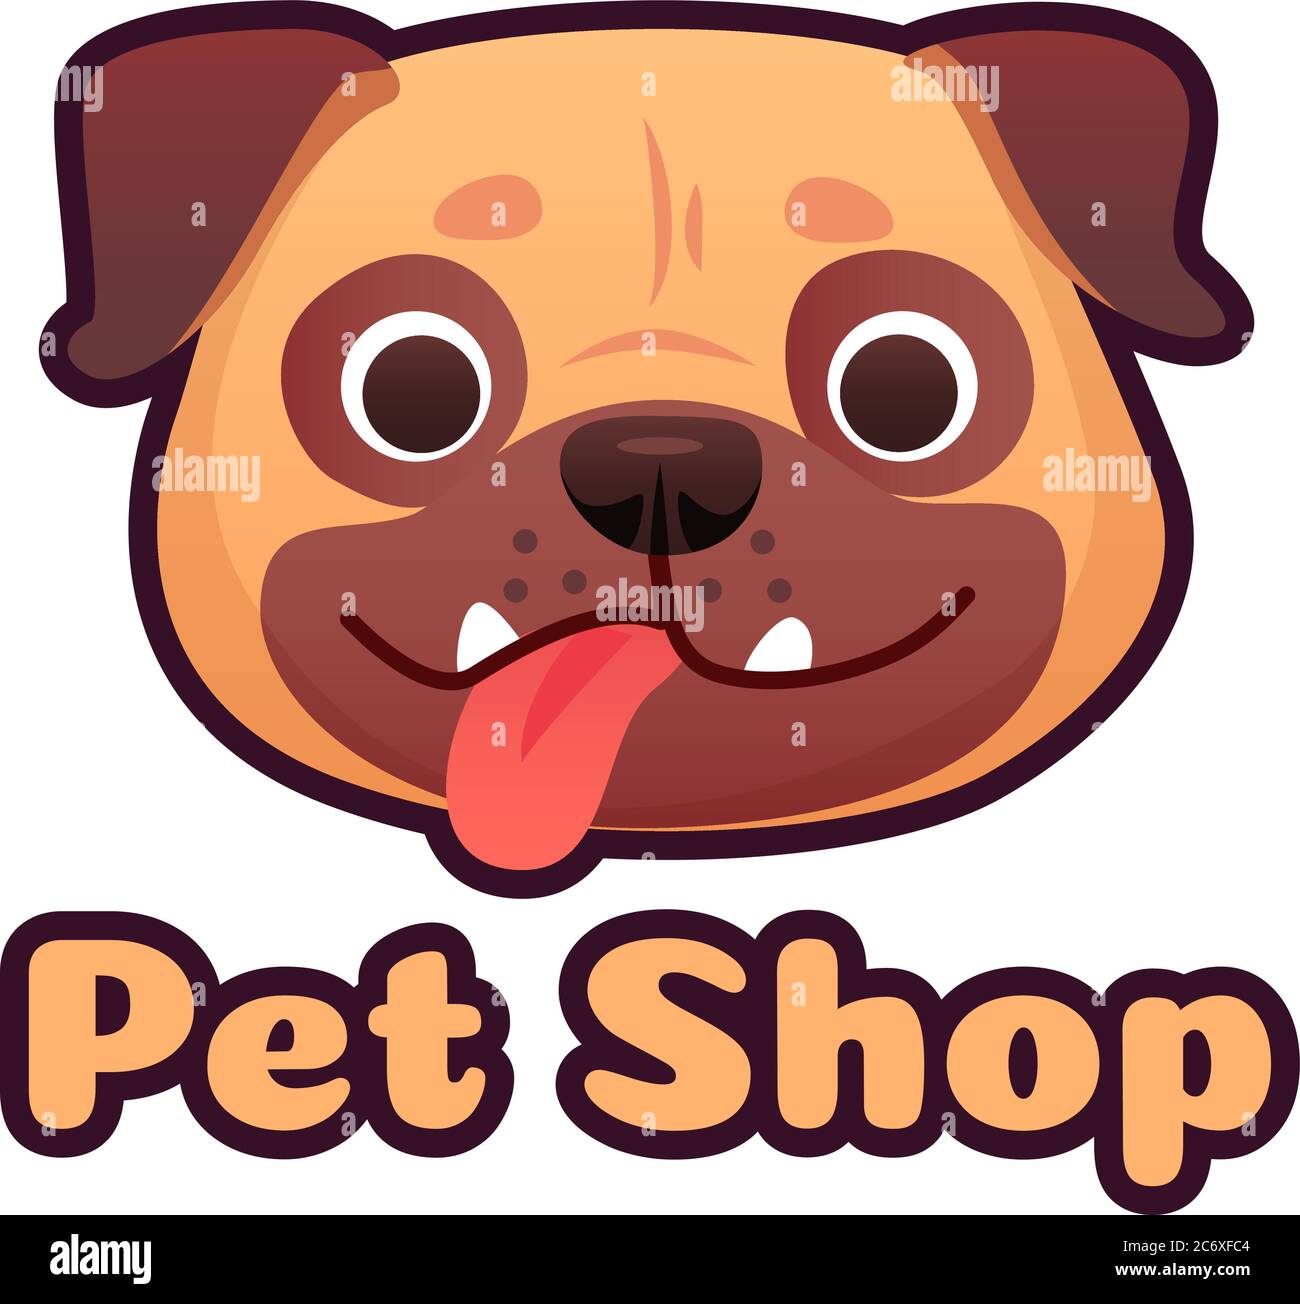 Pet shop logo design with pug face. Dog store selling goods and accessories for domestic animals, puppy head Stock Vector